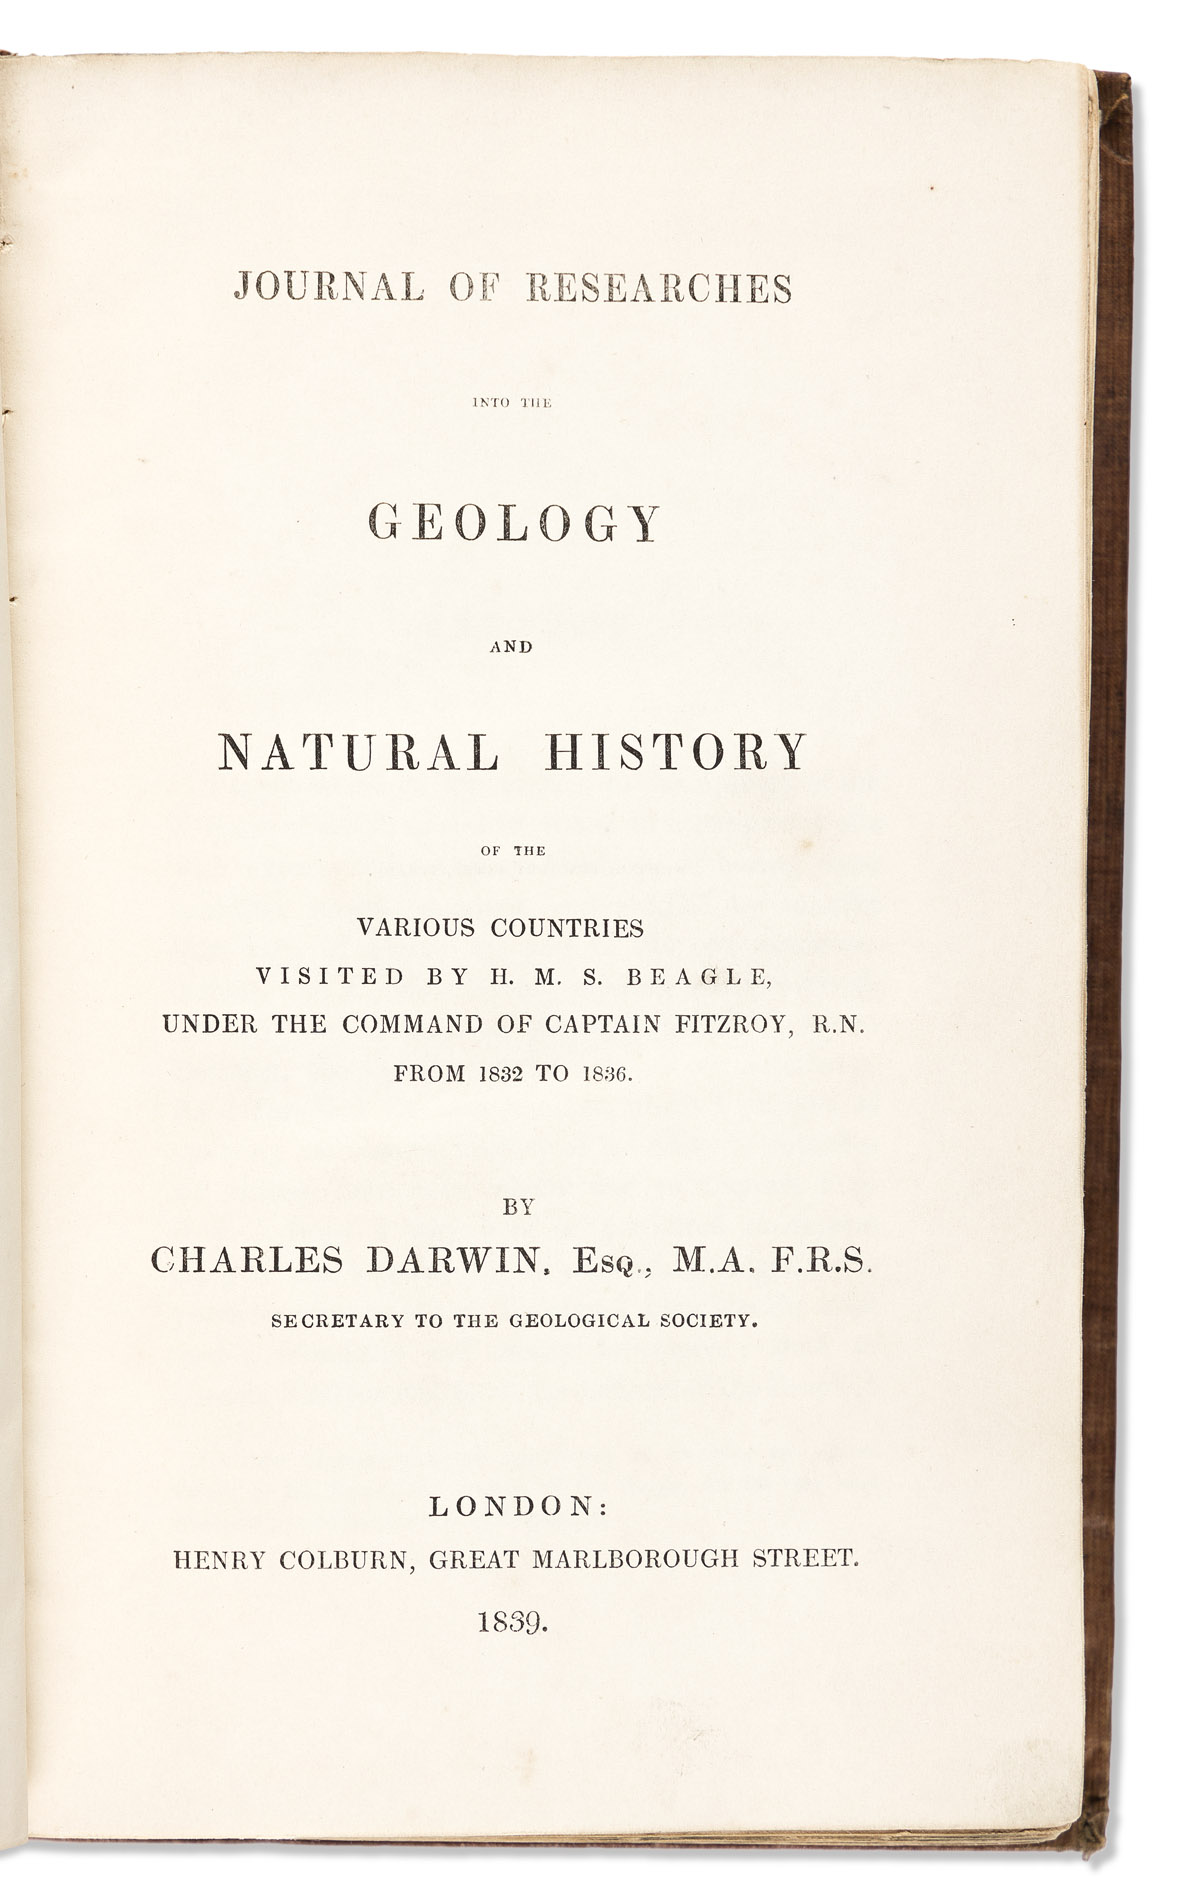 Darwin, Charles (1809-1882) Journal of Researches in Geology and Natural History of the Various Countries Visited by H.M.S Beagle.